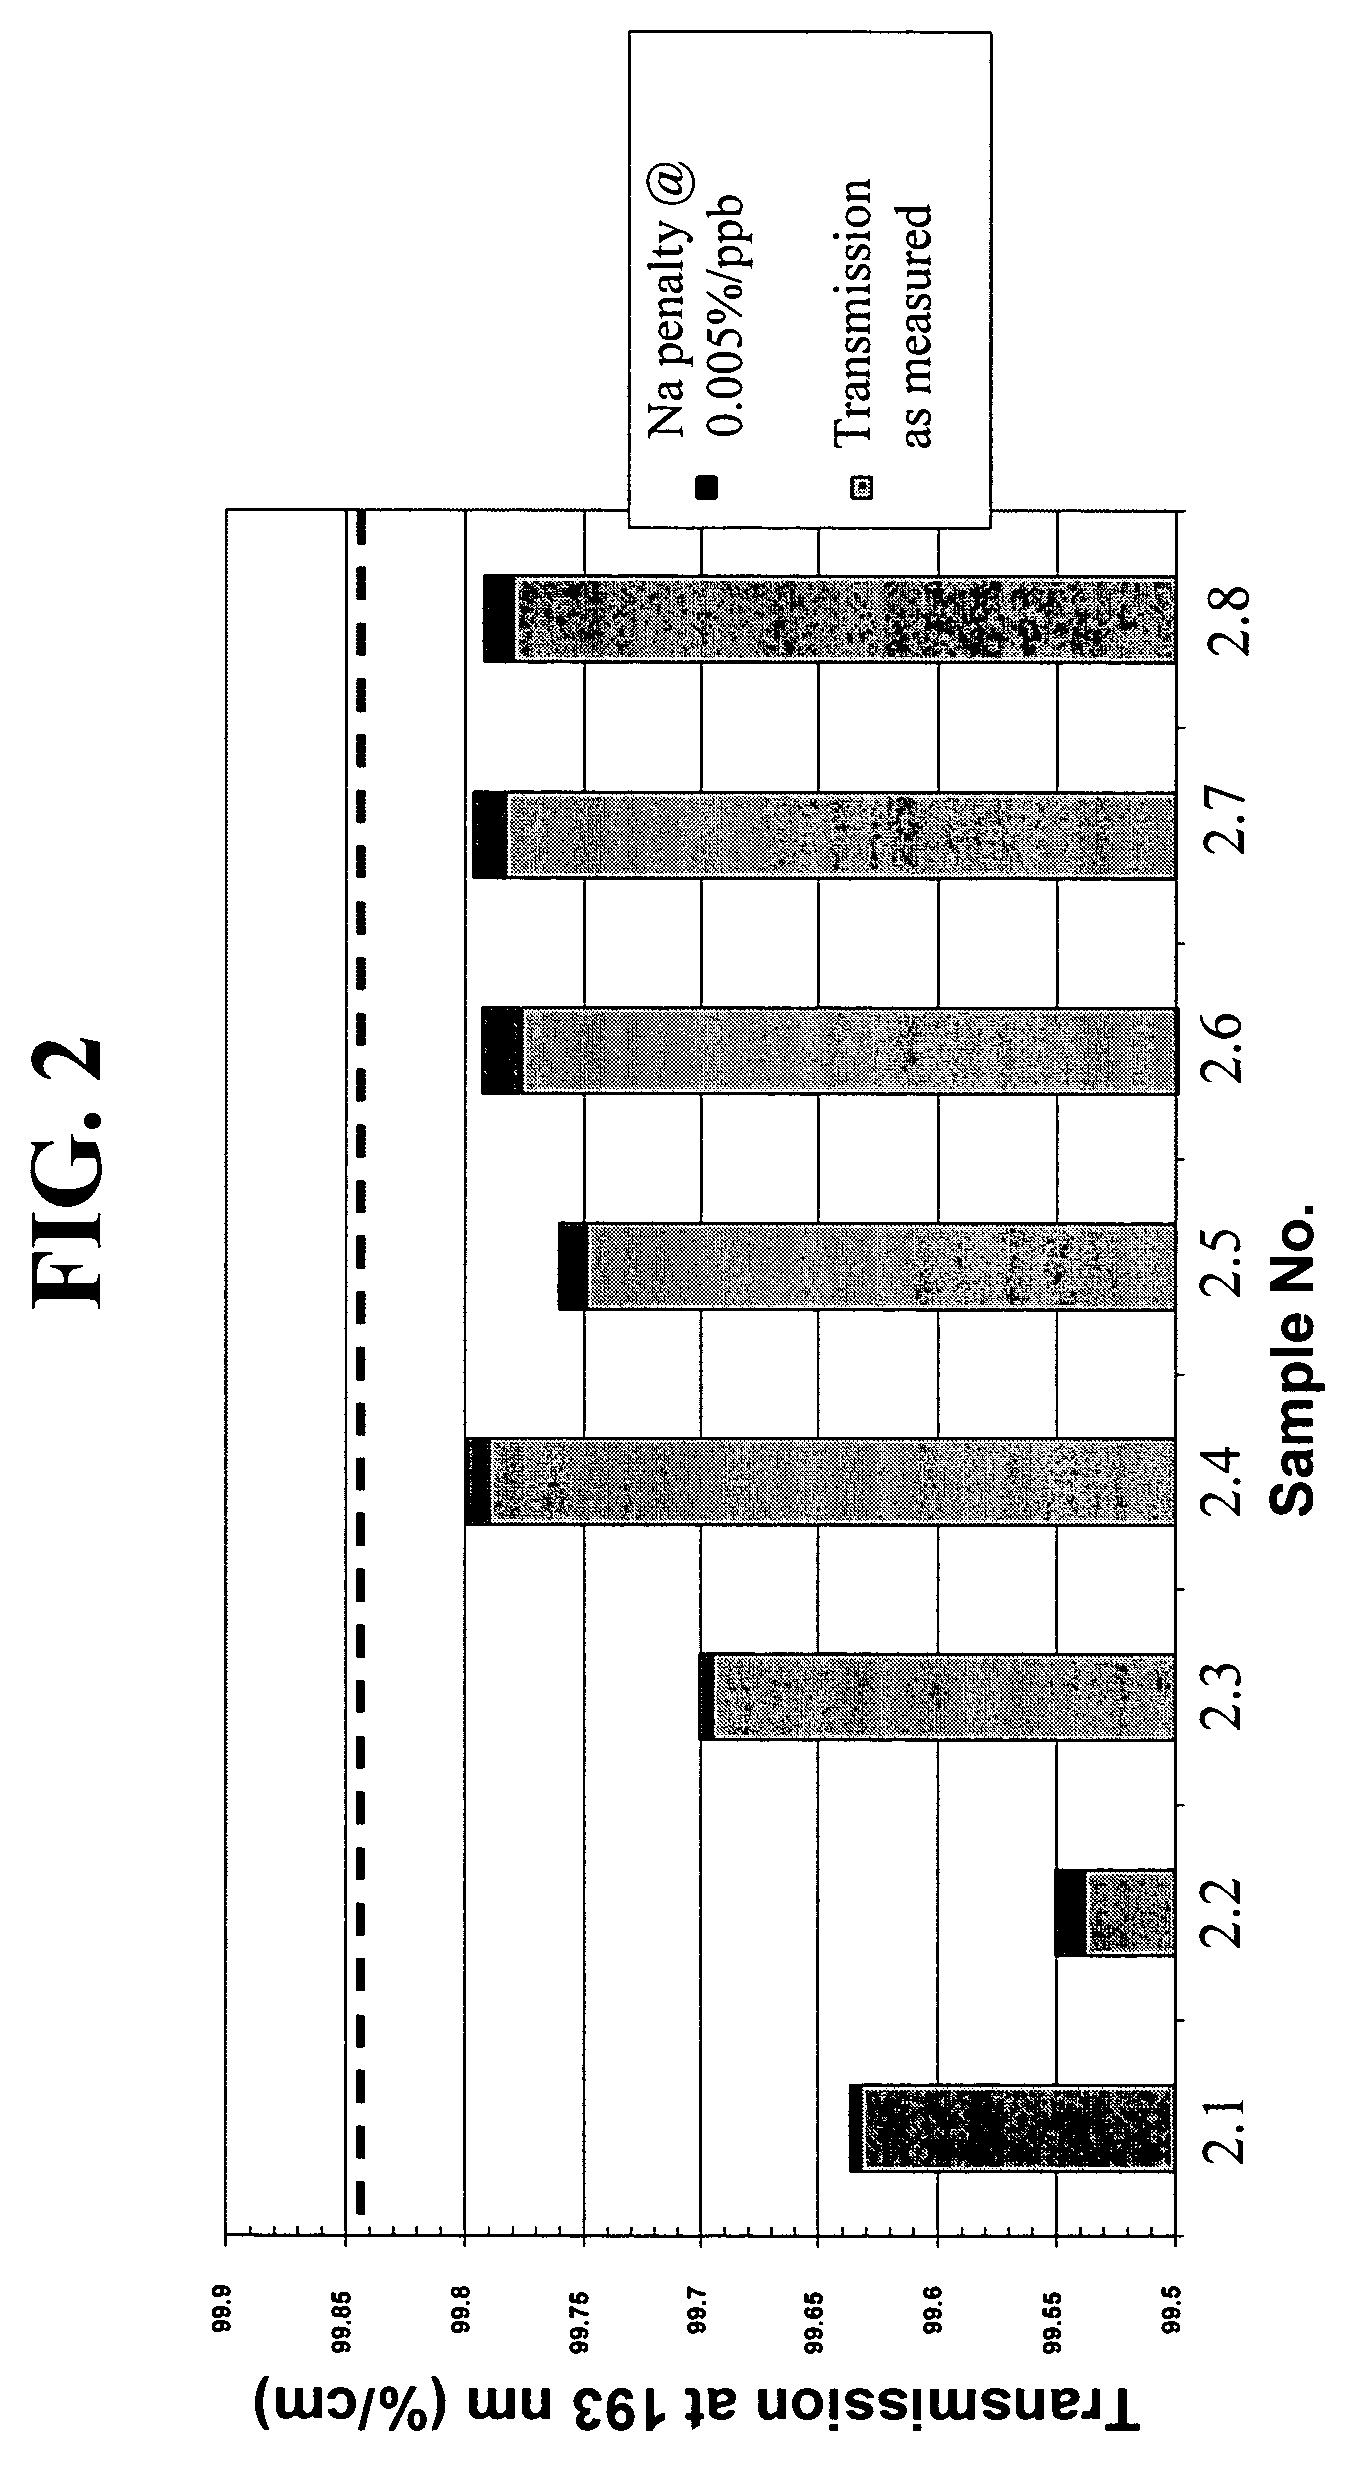 High transmission synthetic silica glass and method of making same